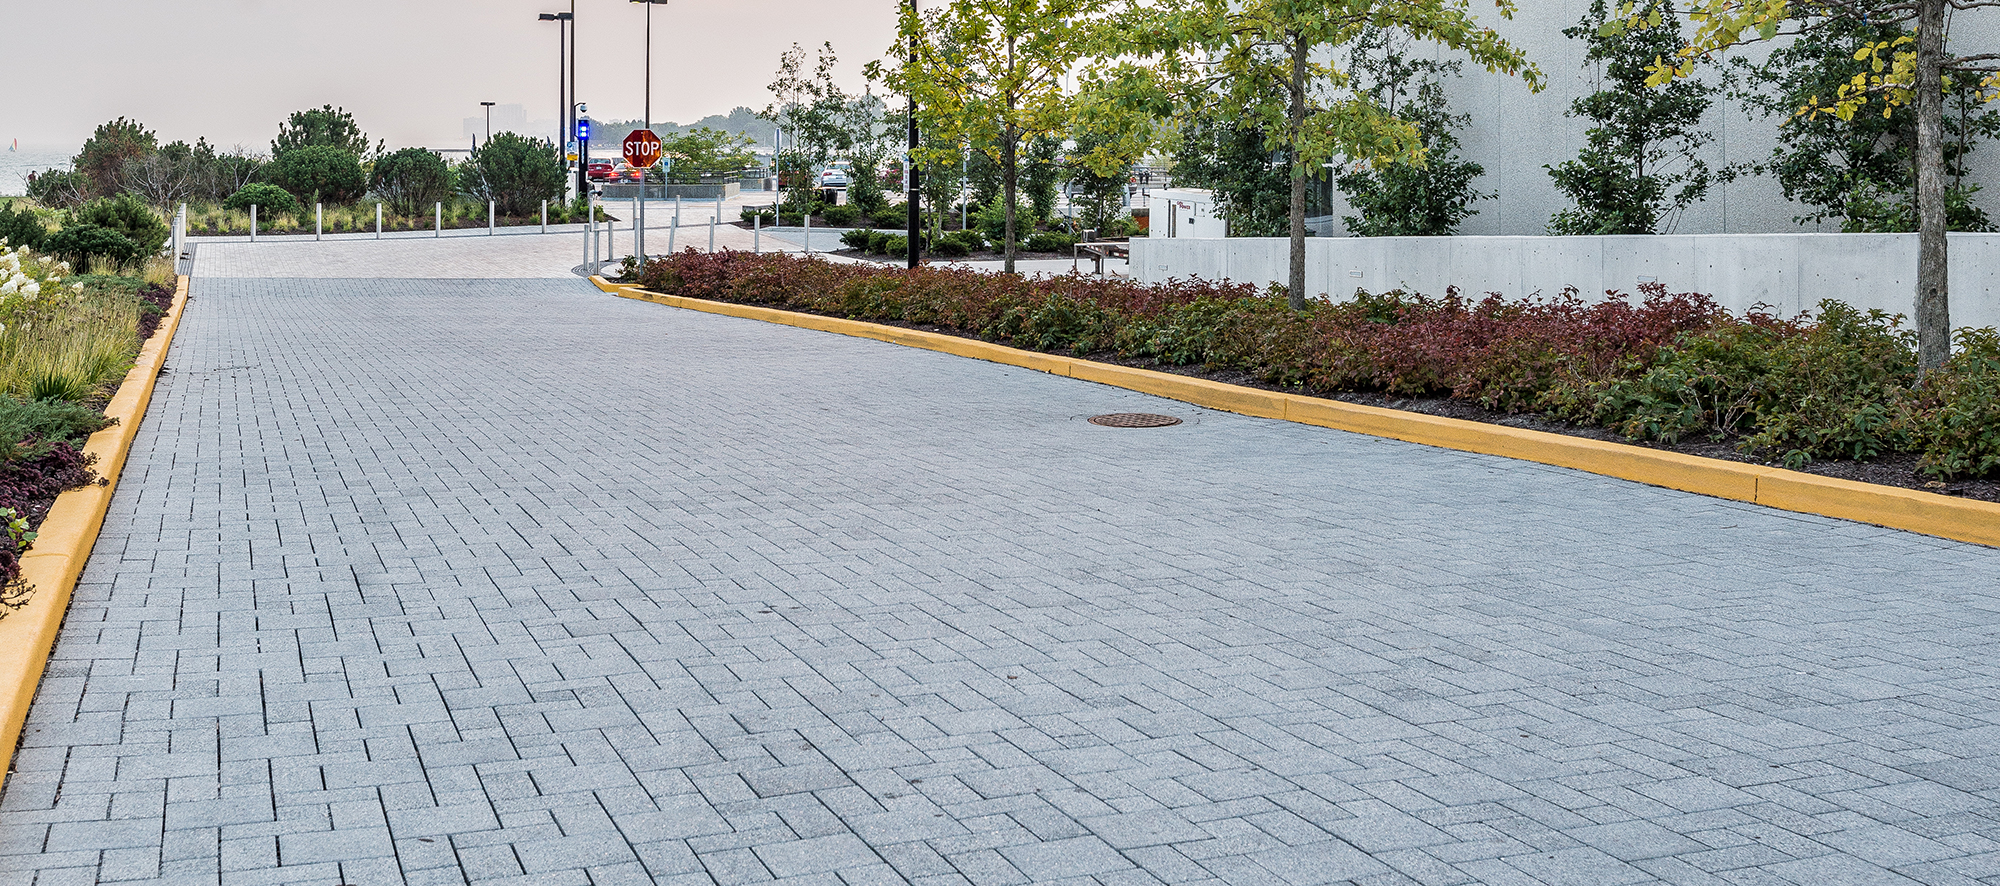 A road leading to a parking lot is paved with varying shapes of Eco-Priora permeable paver in mineral ice grey and bordered by trees and landscaping.